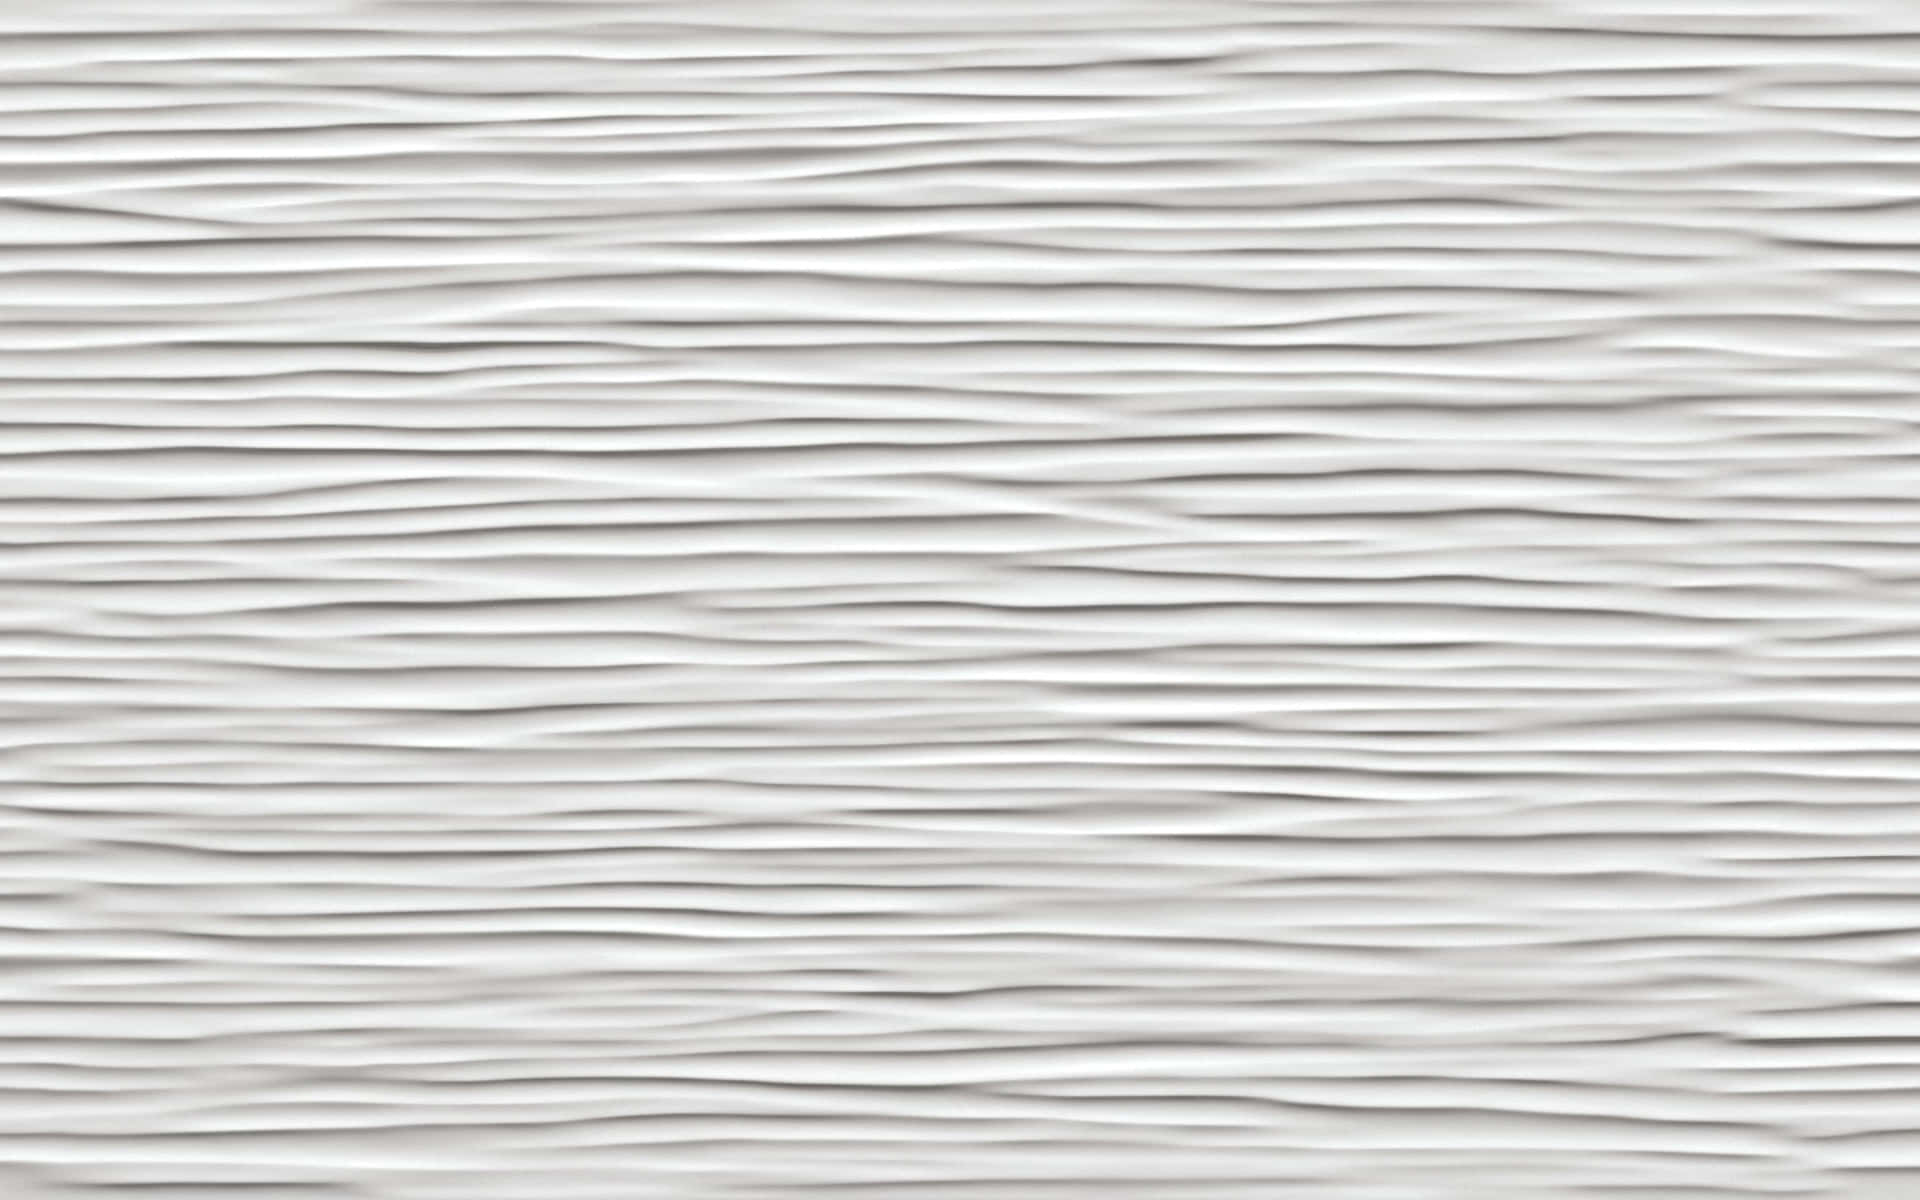 Wavy Carved Lines White Texture Background